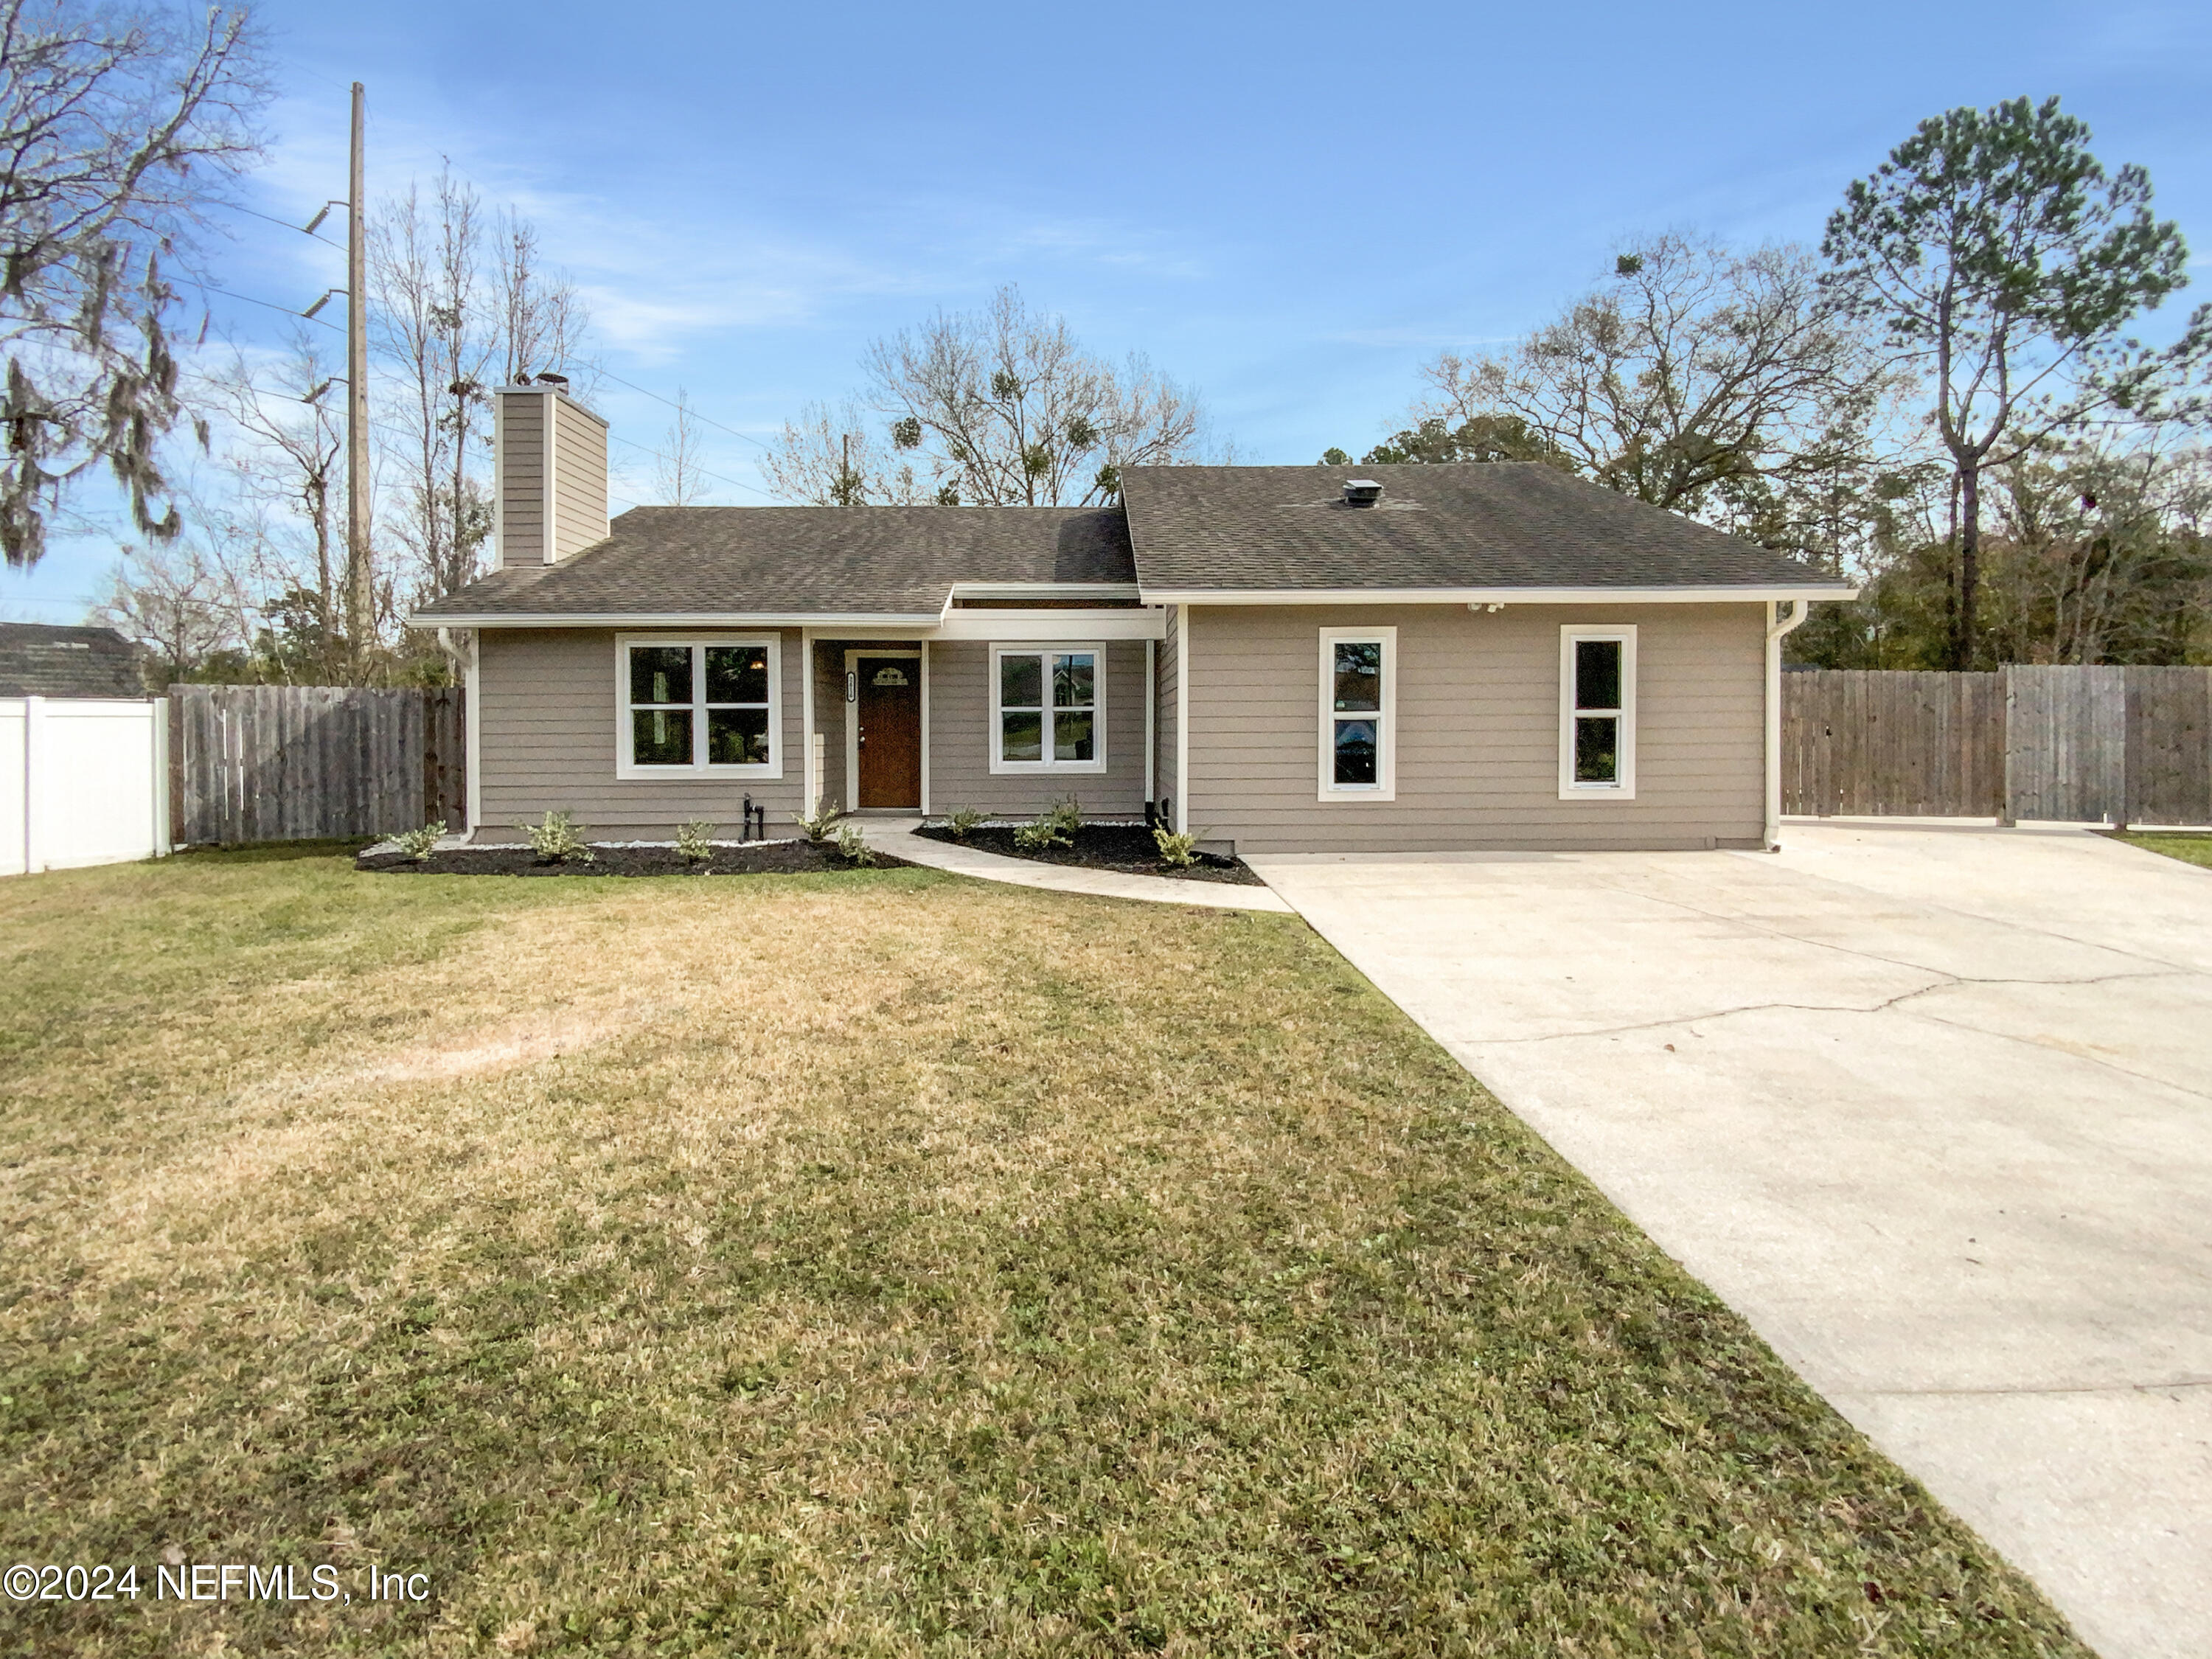 Middleburg, FL home for sale located at 2616 PARLIAMENT Court, Middleburg, FL 32068